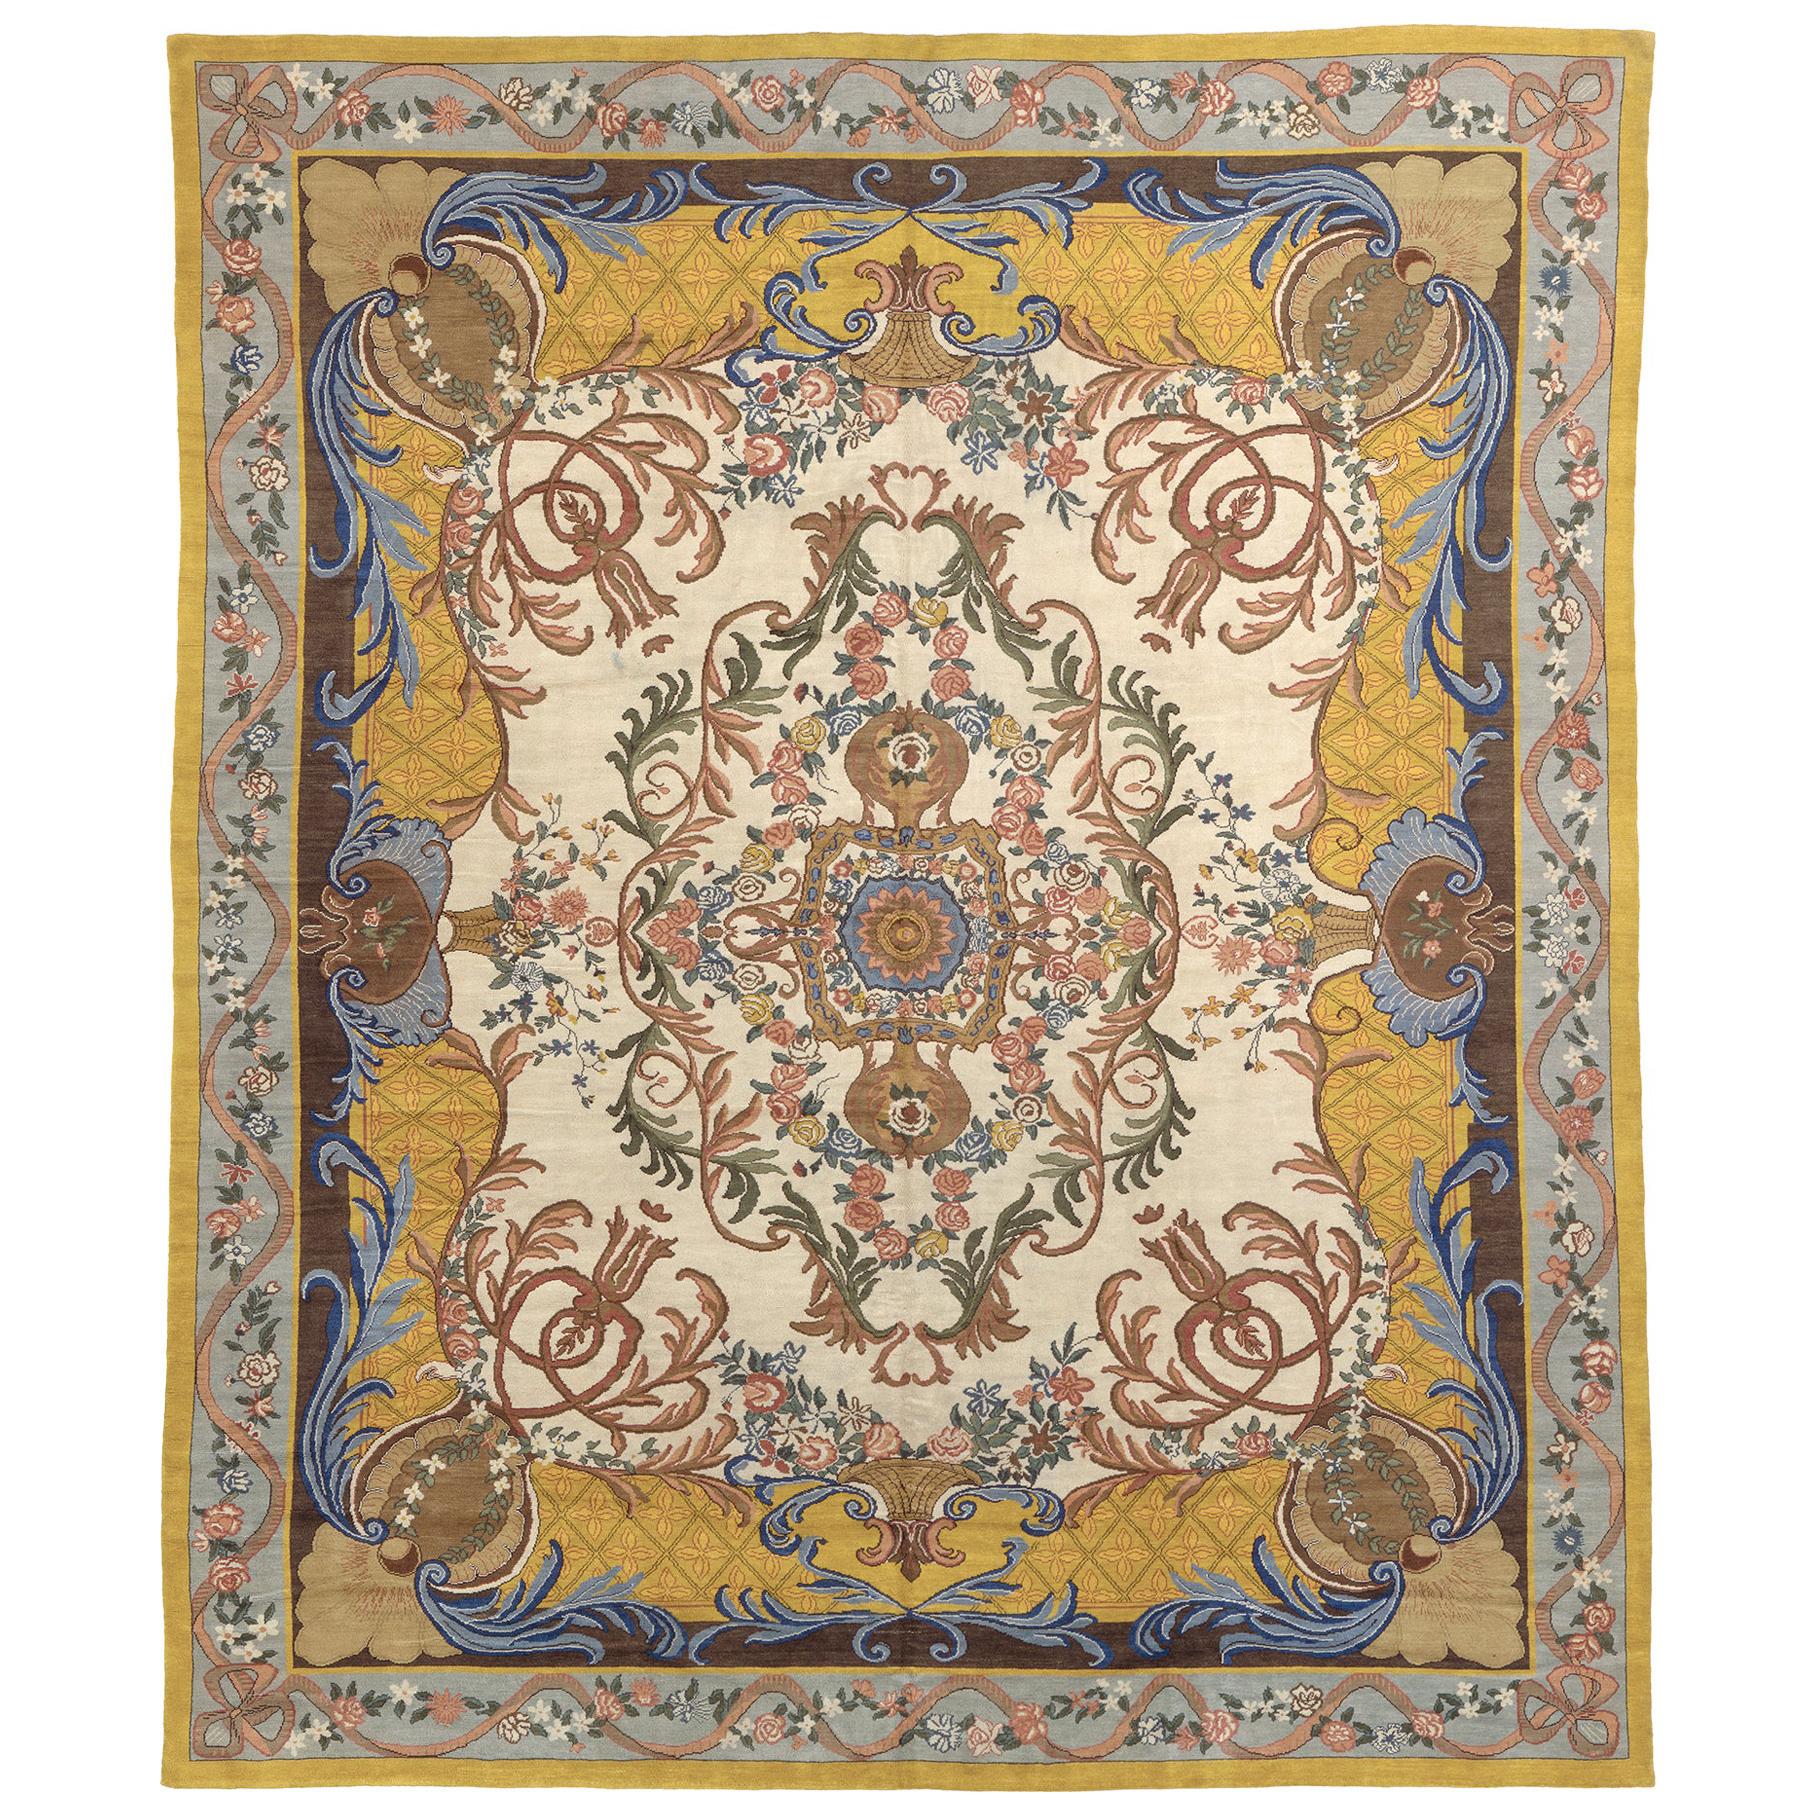 Early 20th Century French Savonnerie Rug